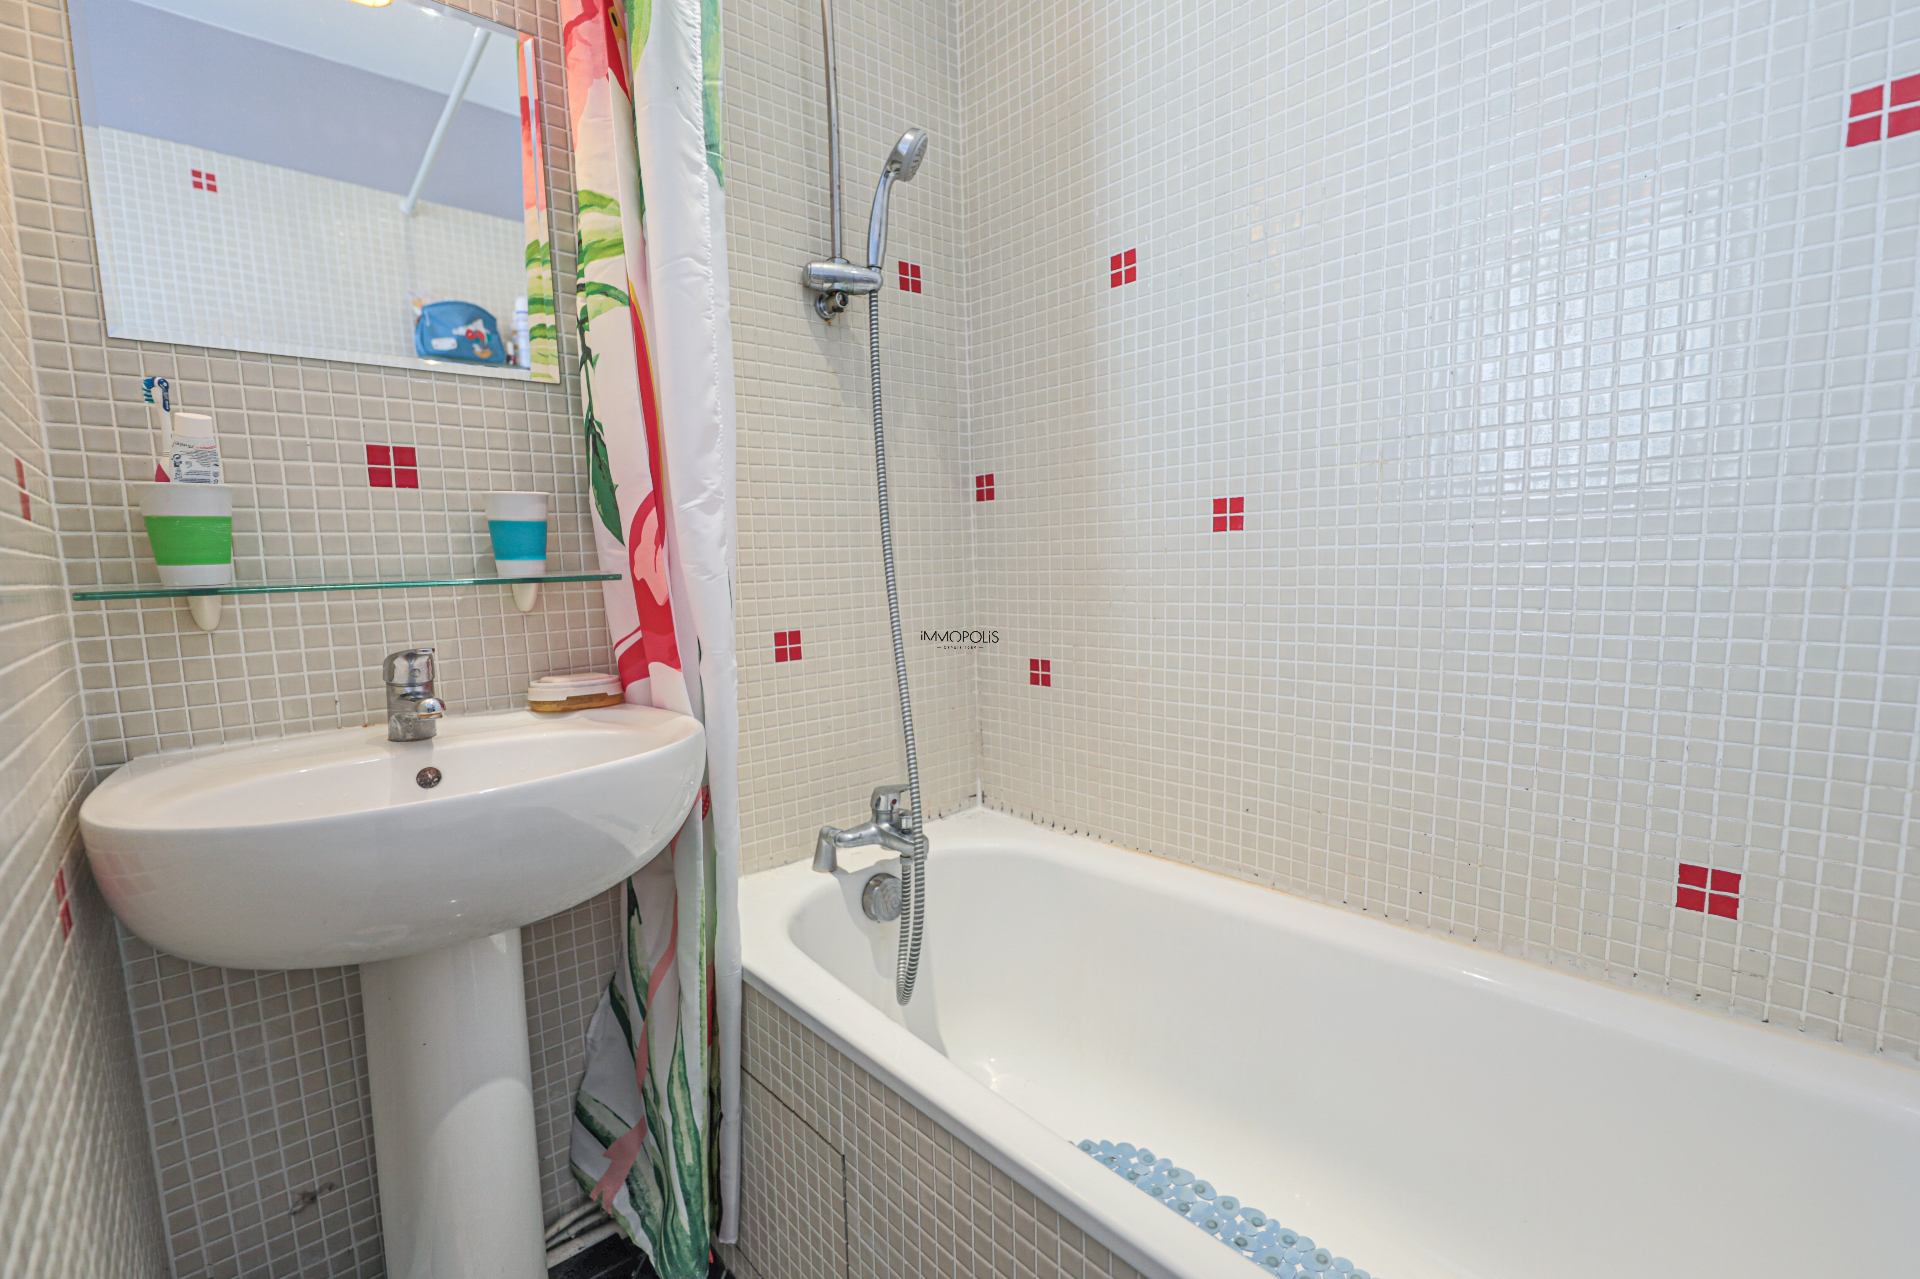 Beau 2 rooms rue Berthe of 30 m2 in good condition with very compact elevator and plan 7